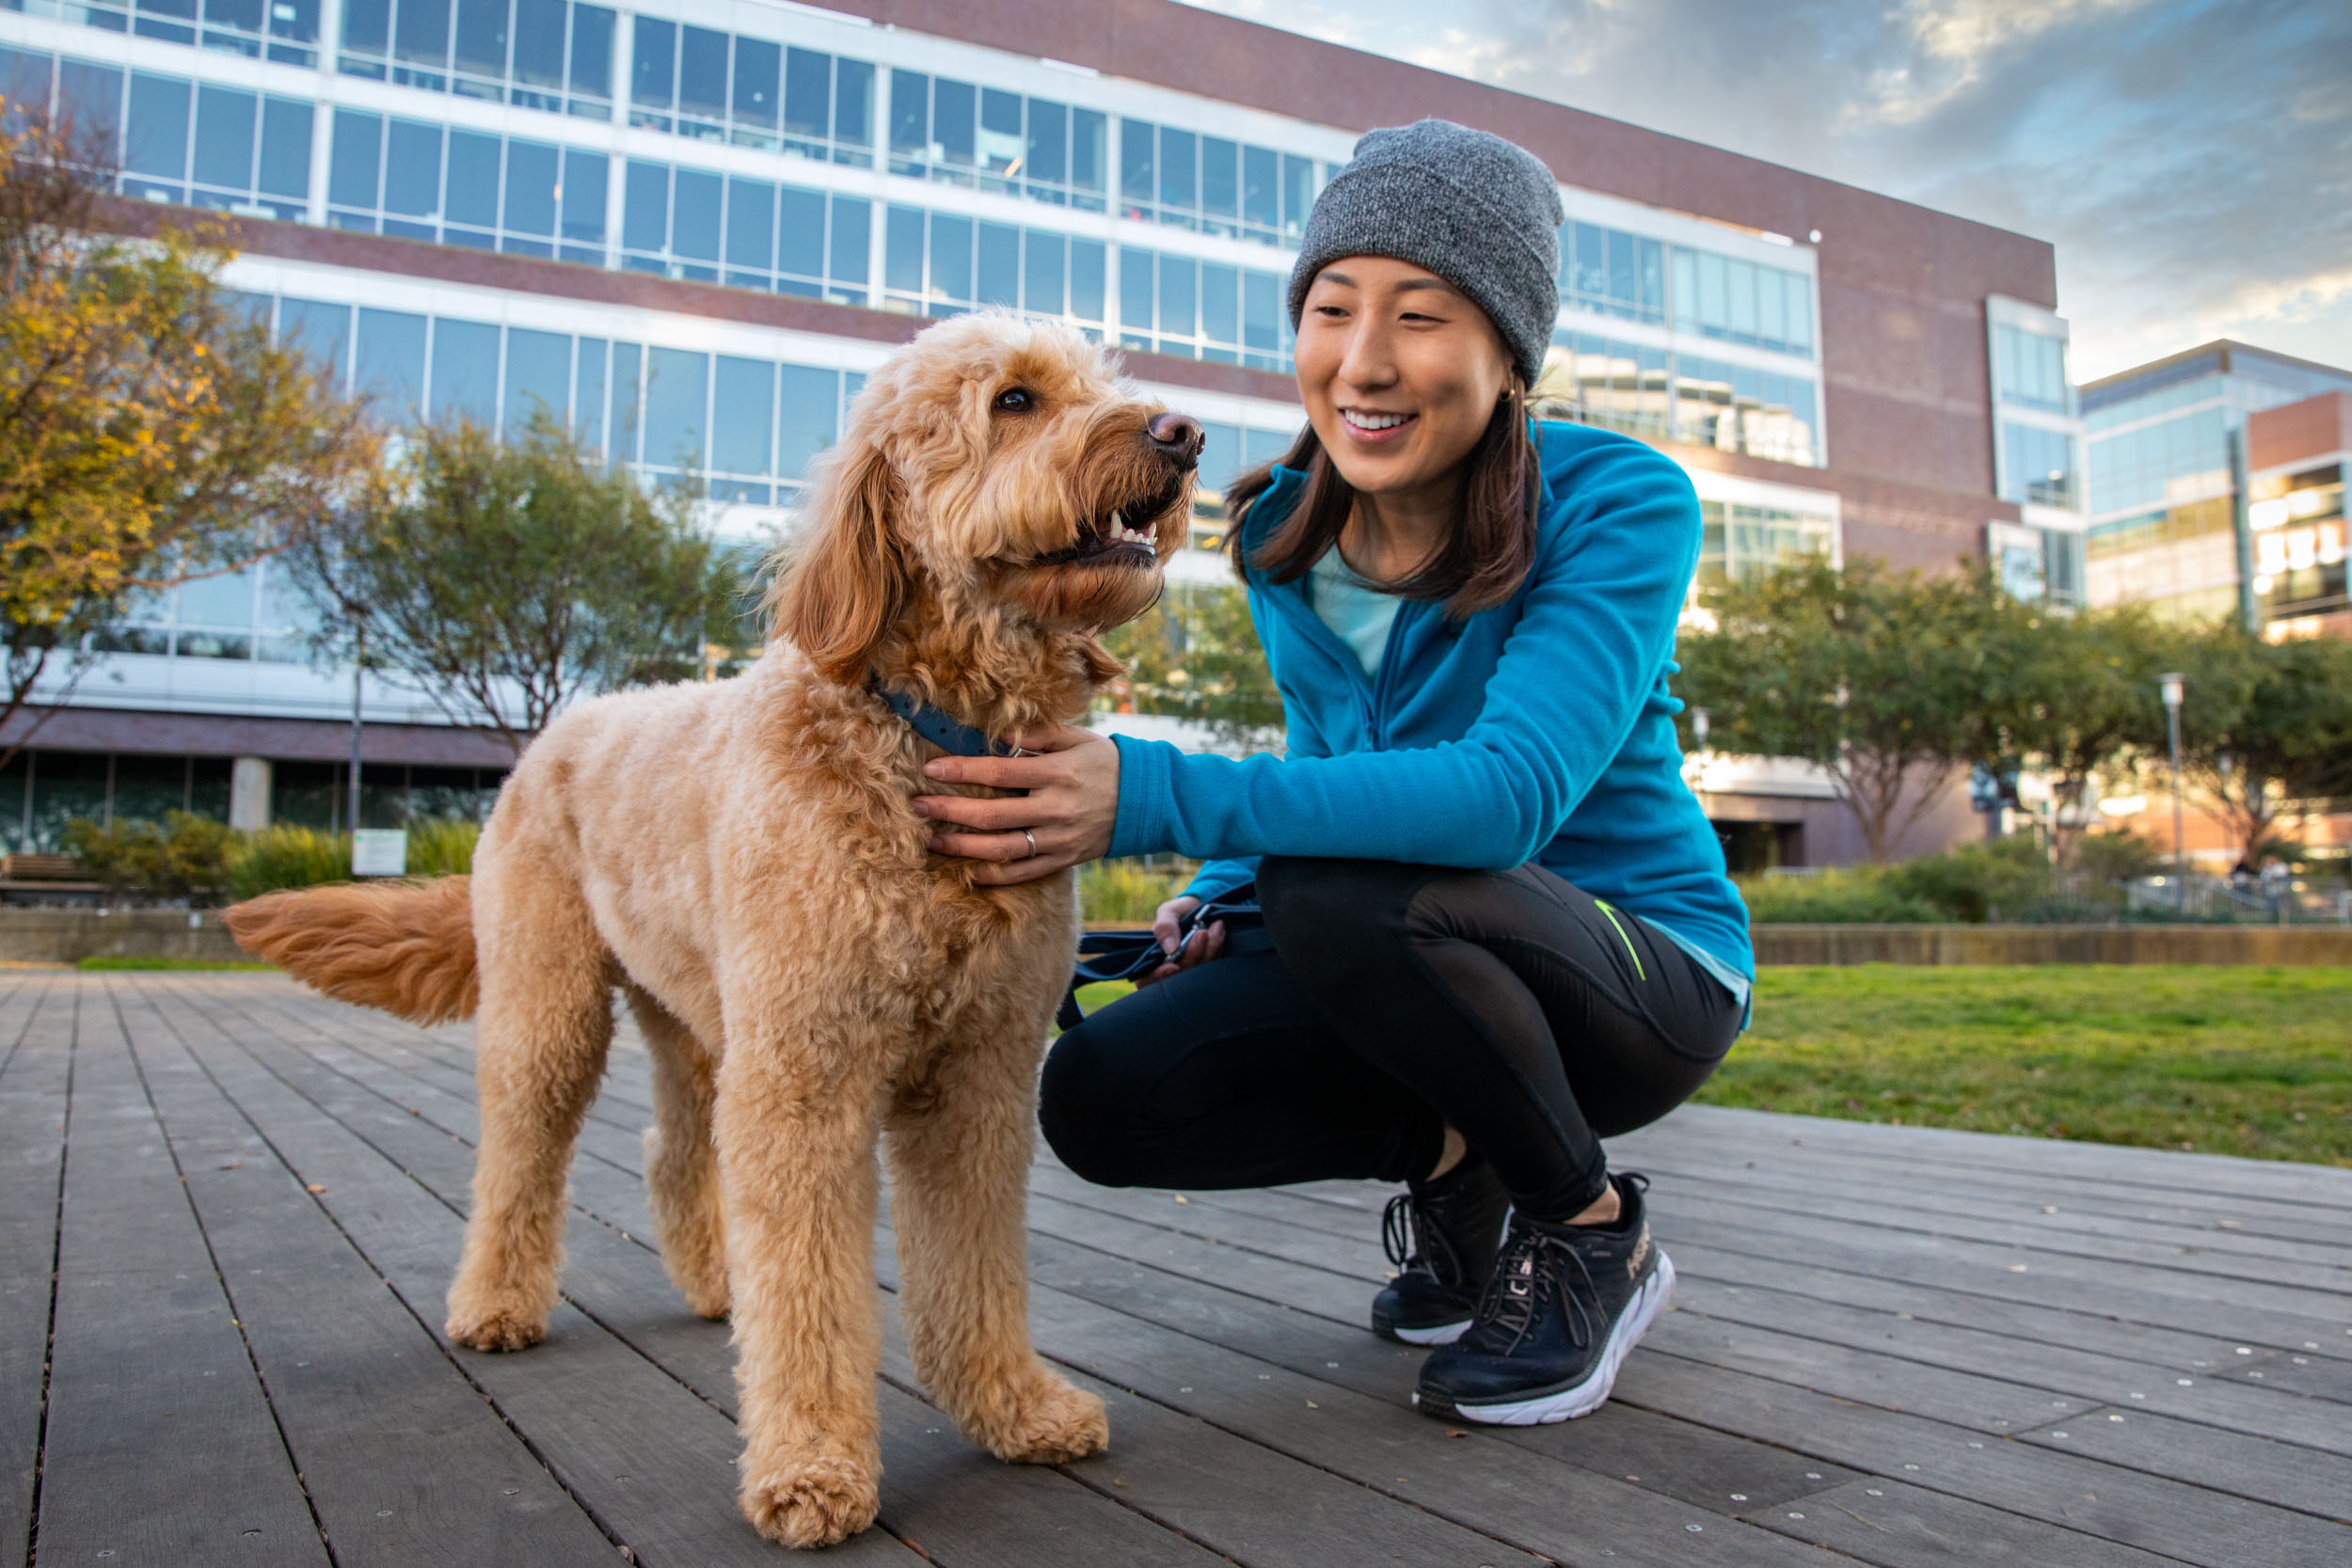 Asian Woman in Hat Next to Goldendoodle in City Park